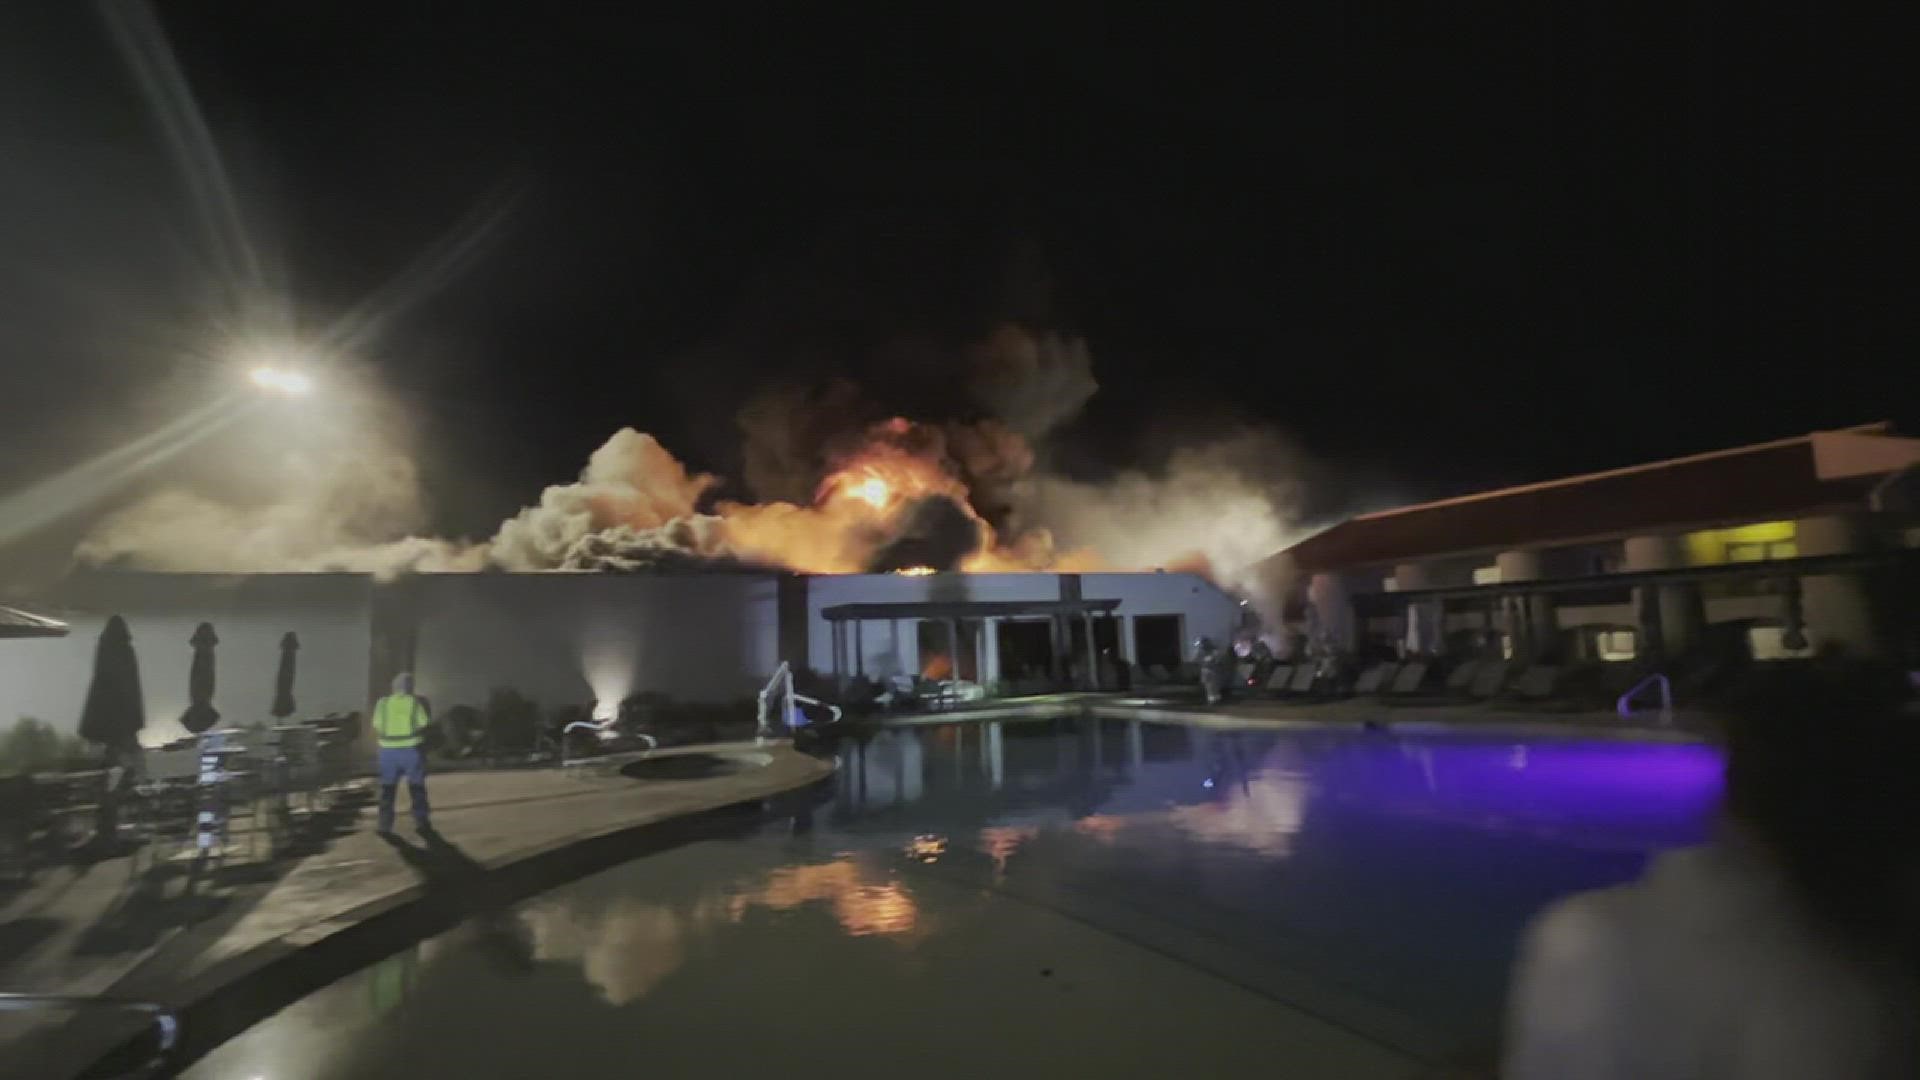 An overnight fire has damaged the spa at a resort in the Texas Hill Country.